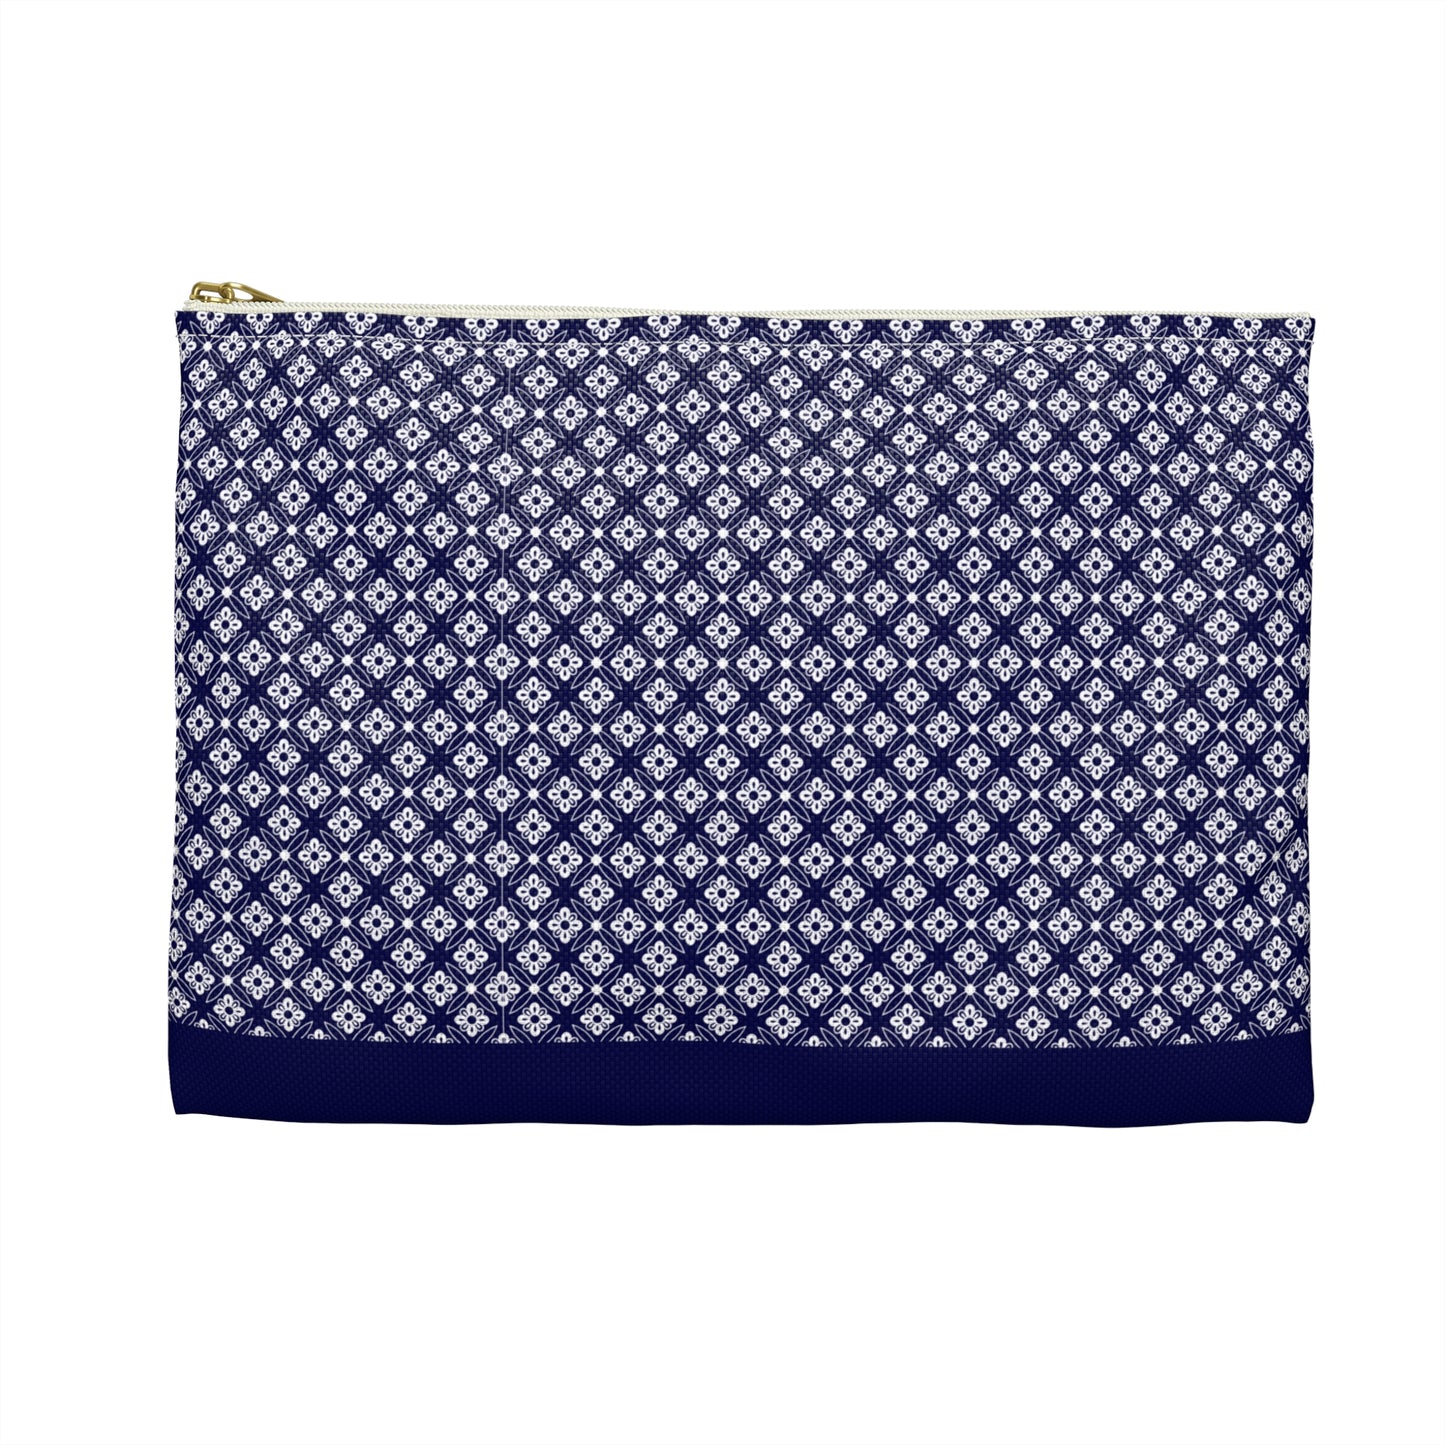 Geometric Flowers Accessory Pouch